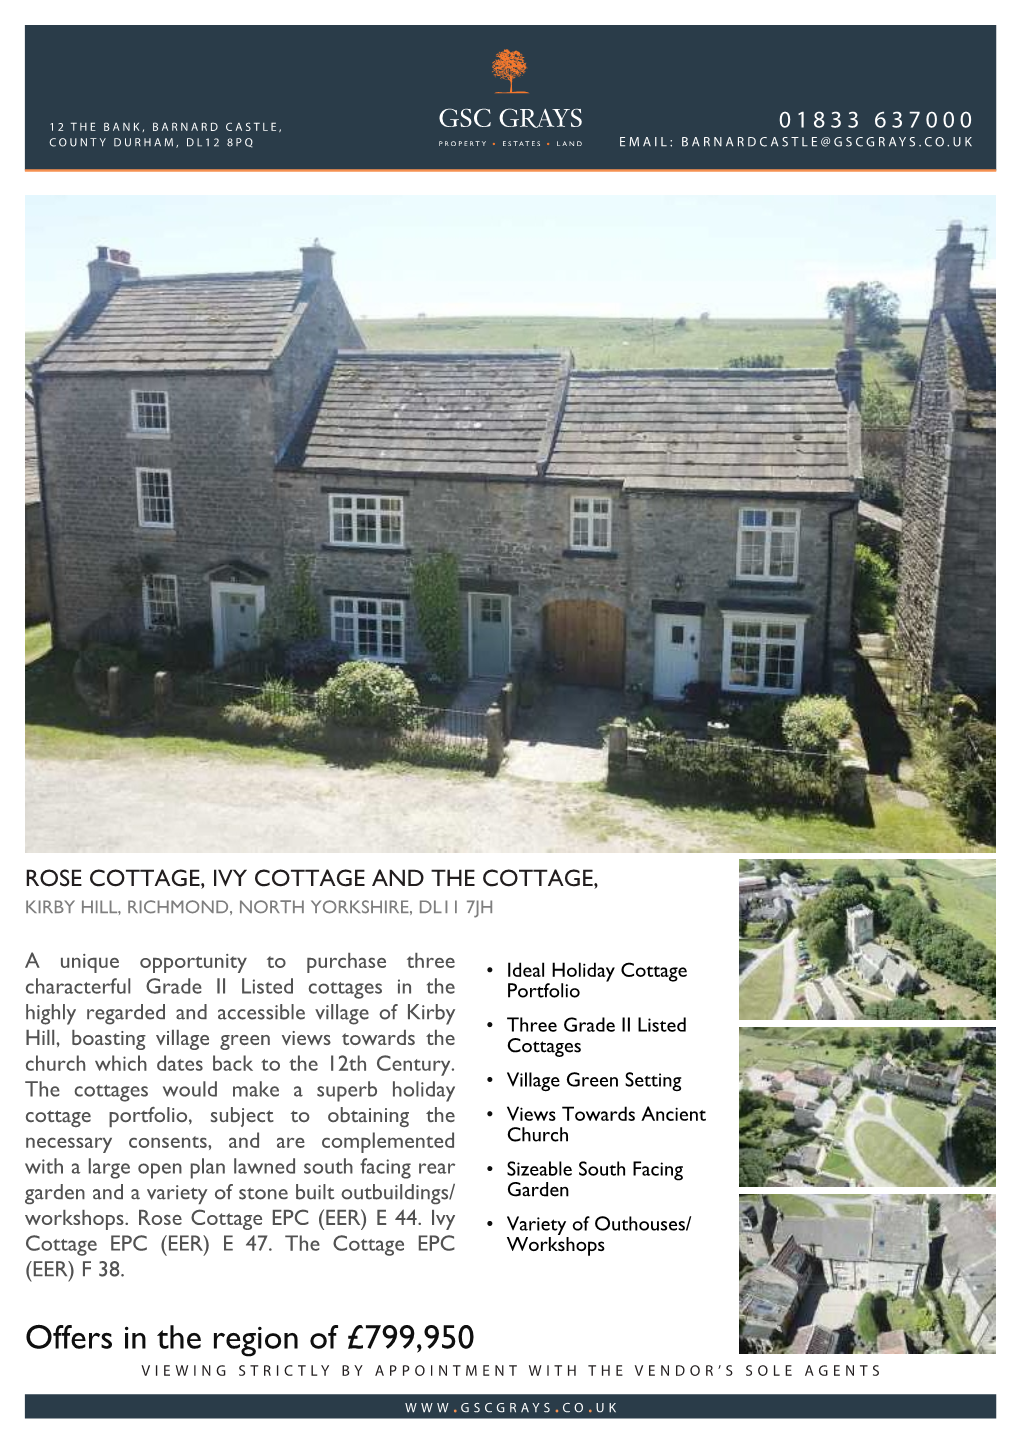 Offers in the Region of £799,950 Viewing Strictly by Appointment with the Vendor’S Sole Agents